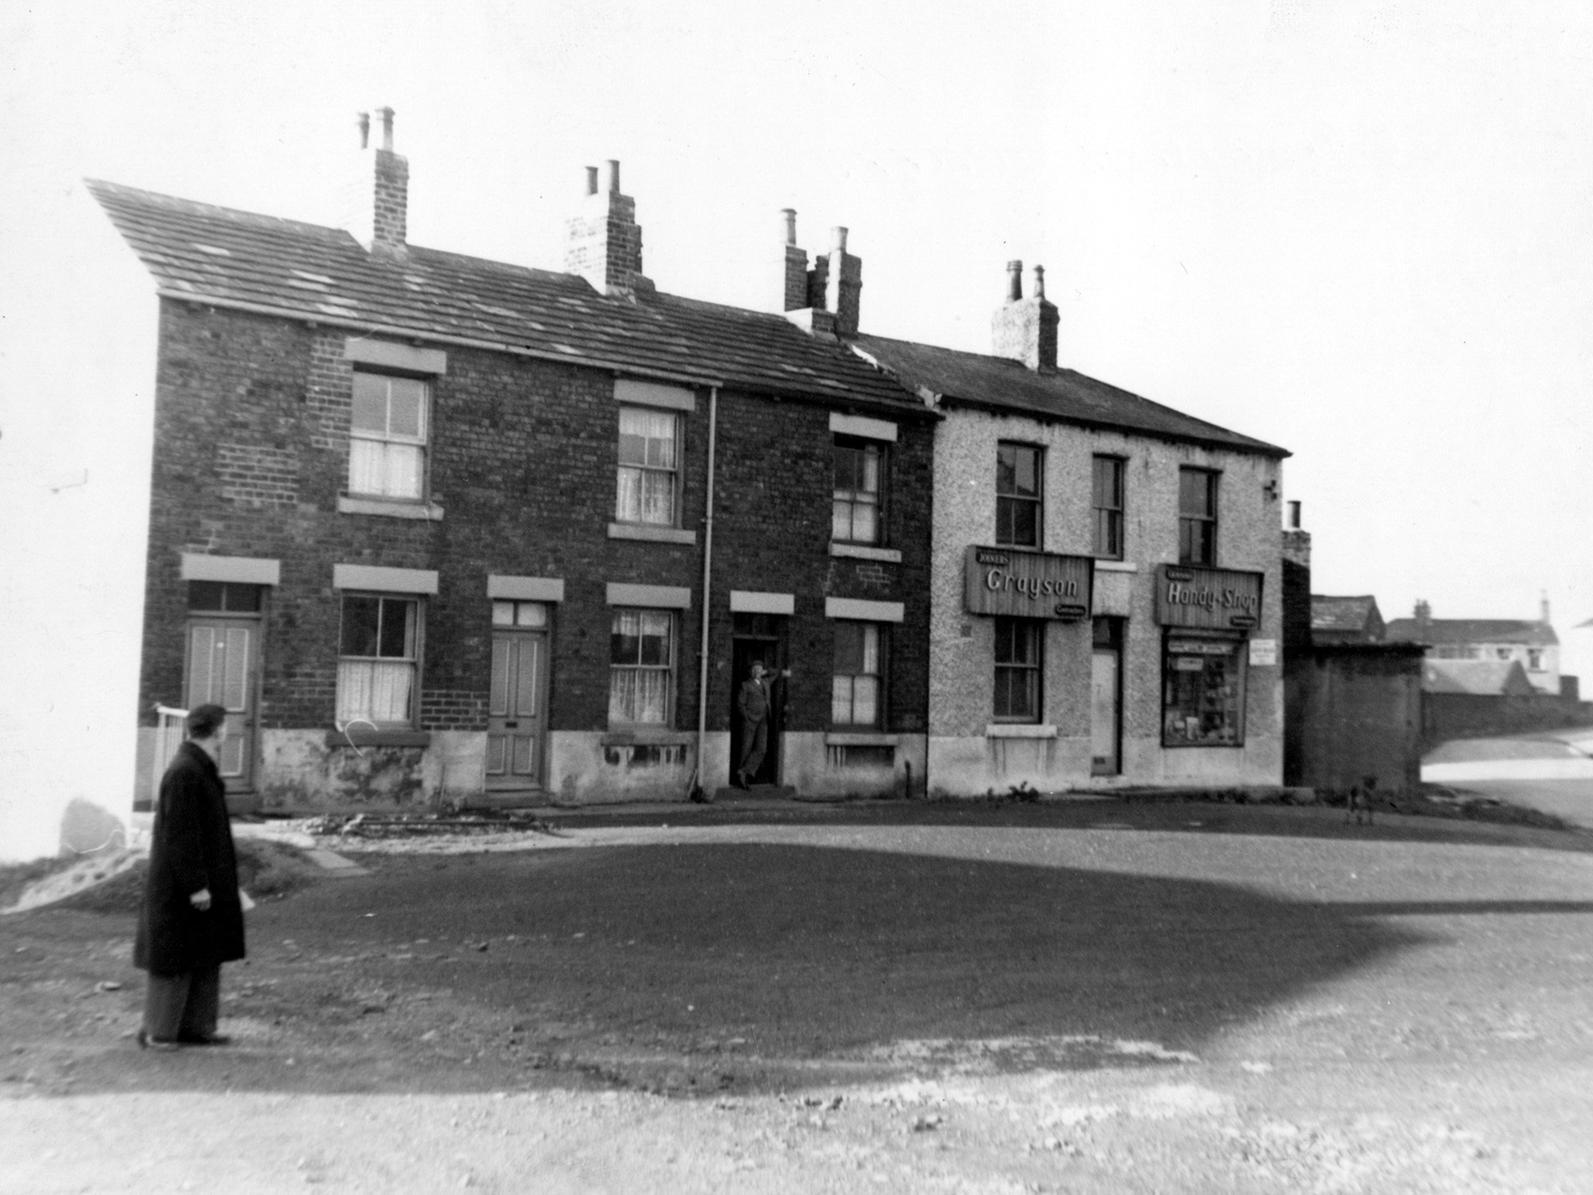 Town End at Gildersome, showing terraced houses and Grayson's Handy Shop in the double fronted end terrace. A man can be seen conversing with a man on the doorstep.